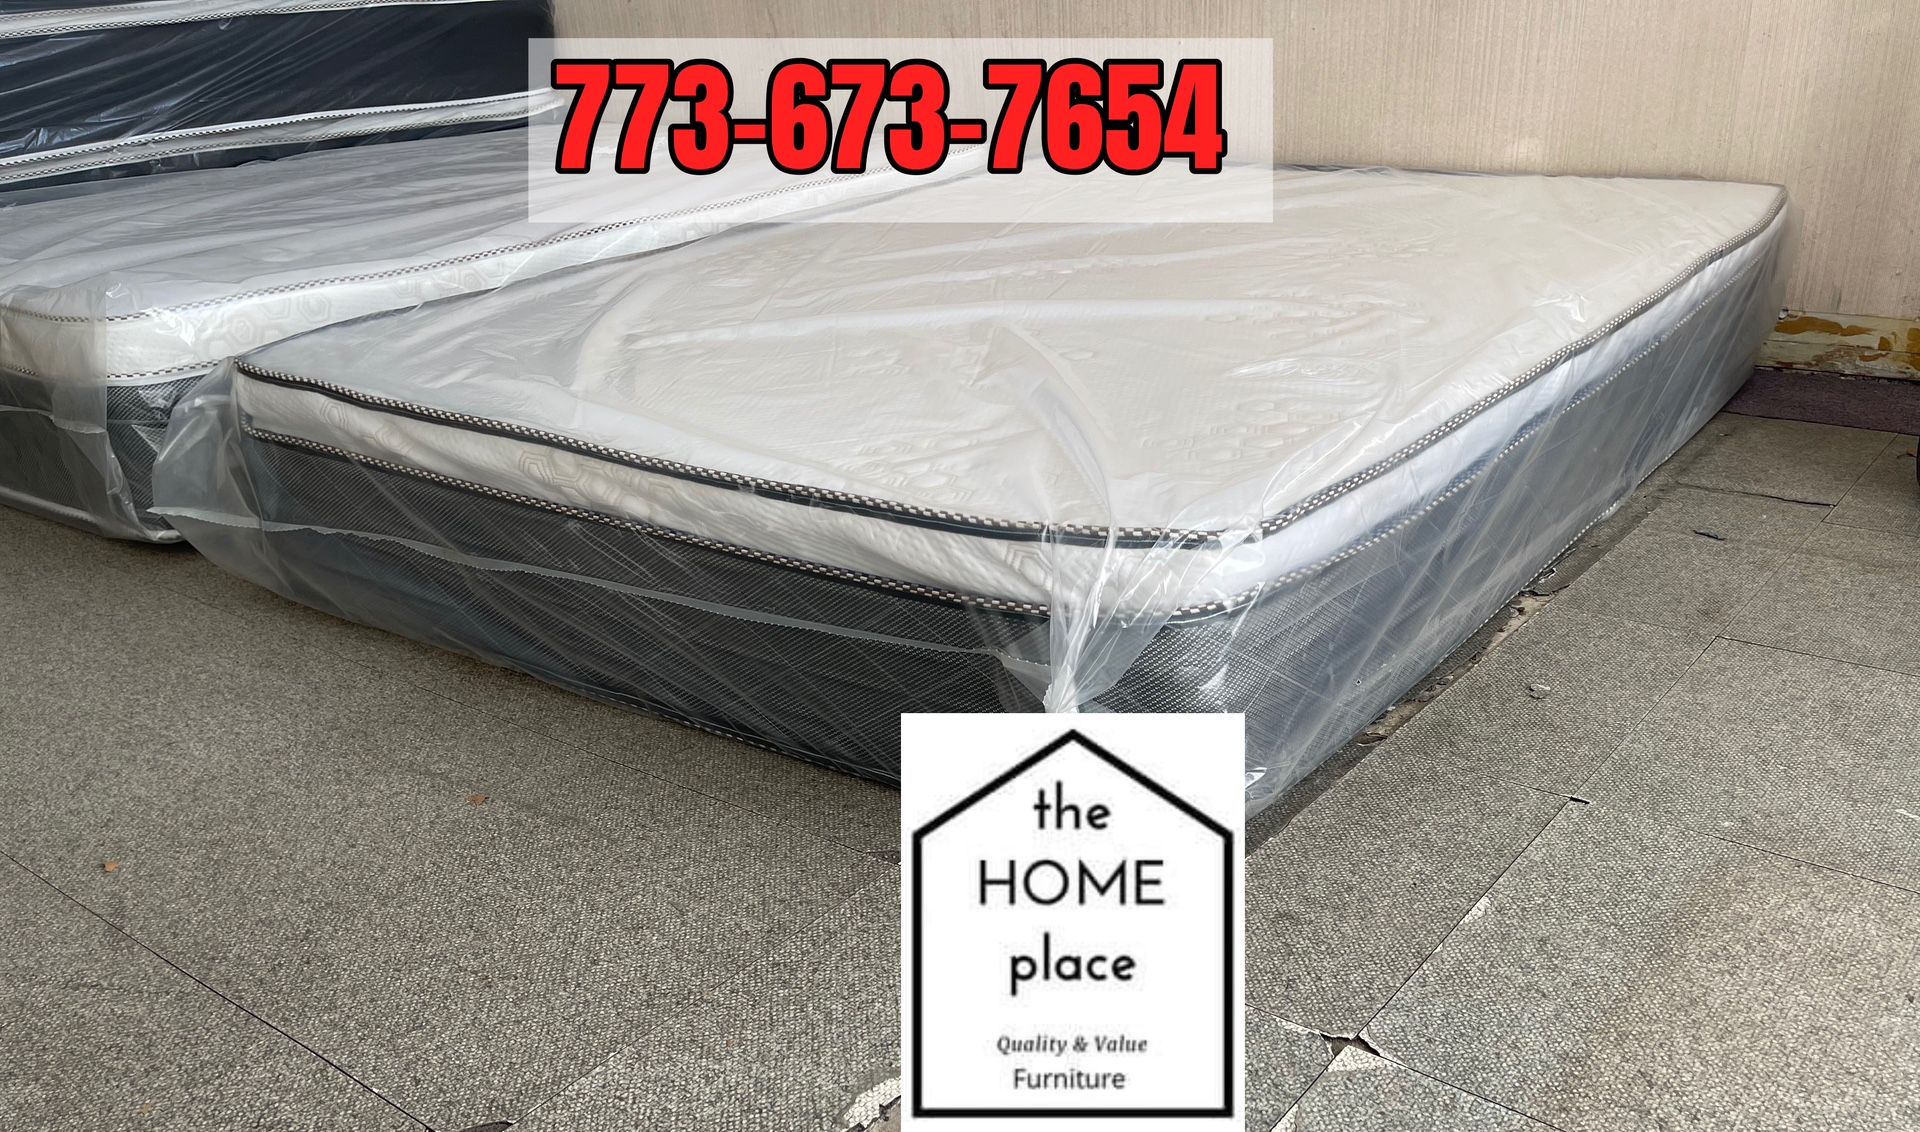 Top Quality Brand New Mattresses On Sale 🚨 - We Deliver 🚛 (Starting Price $99)